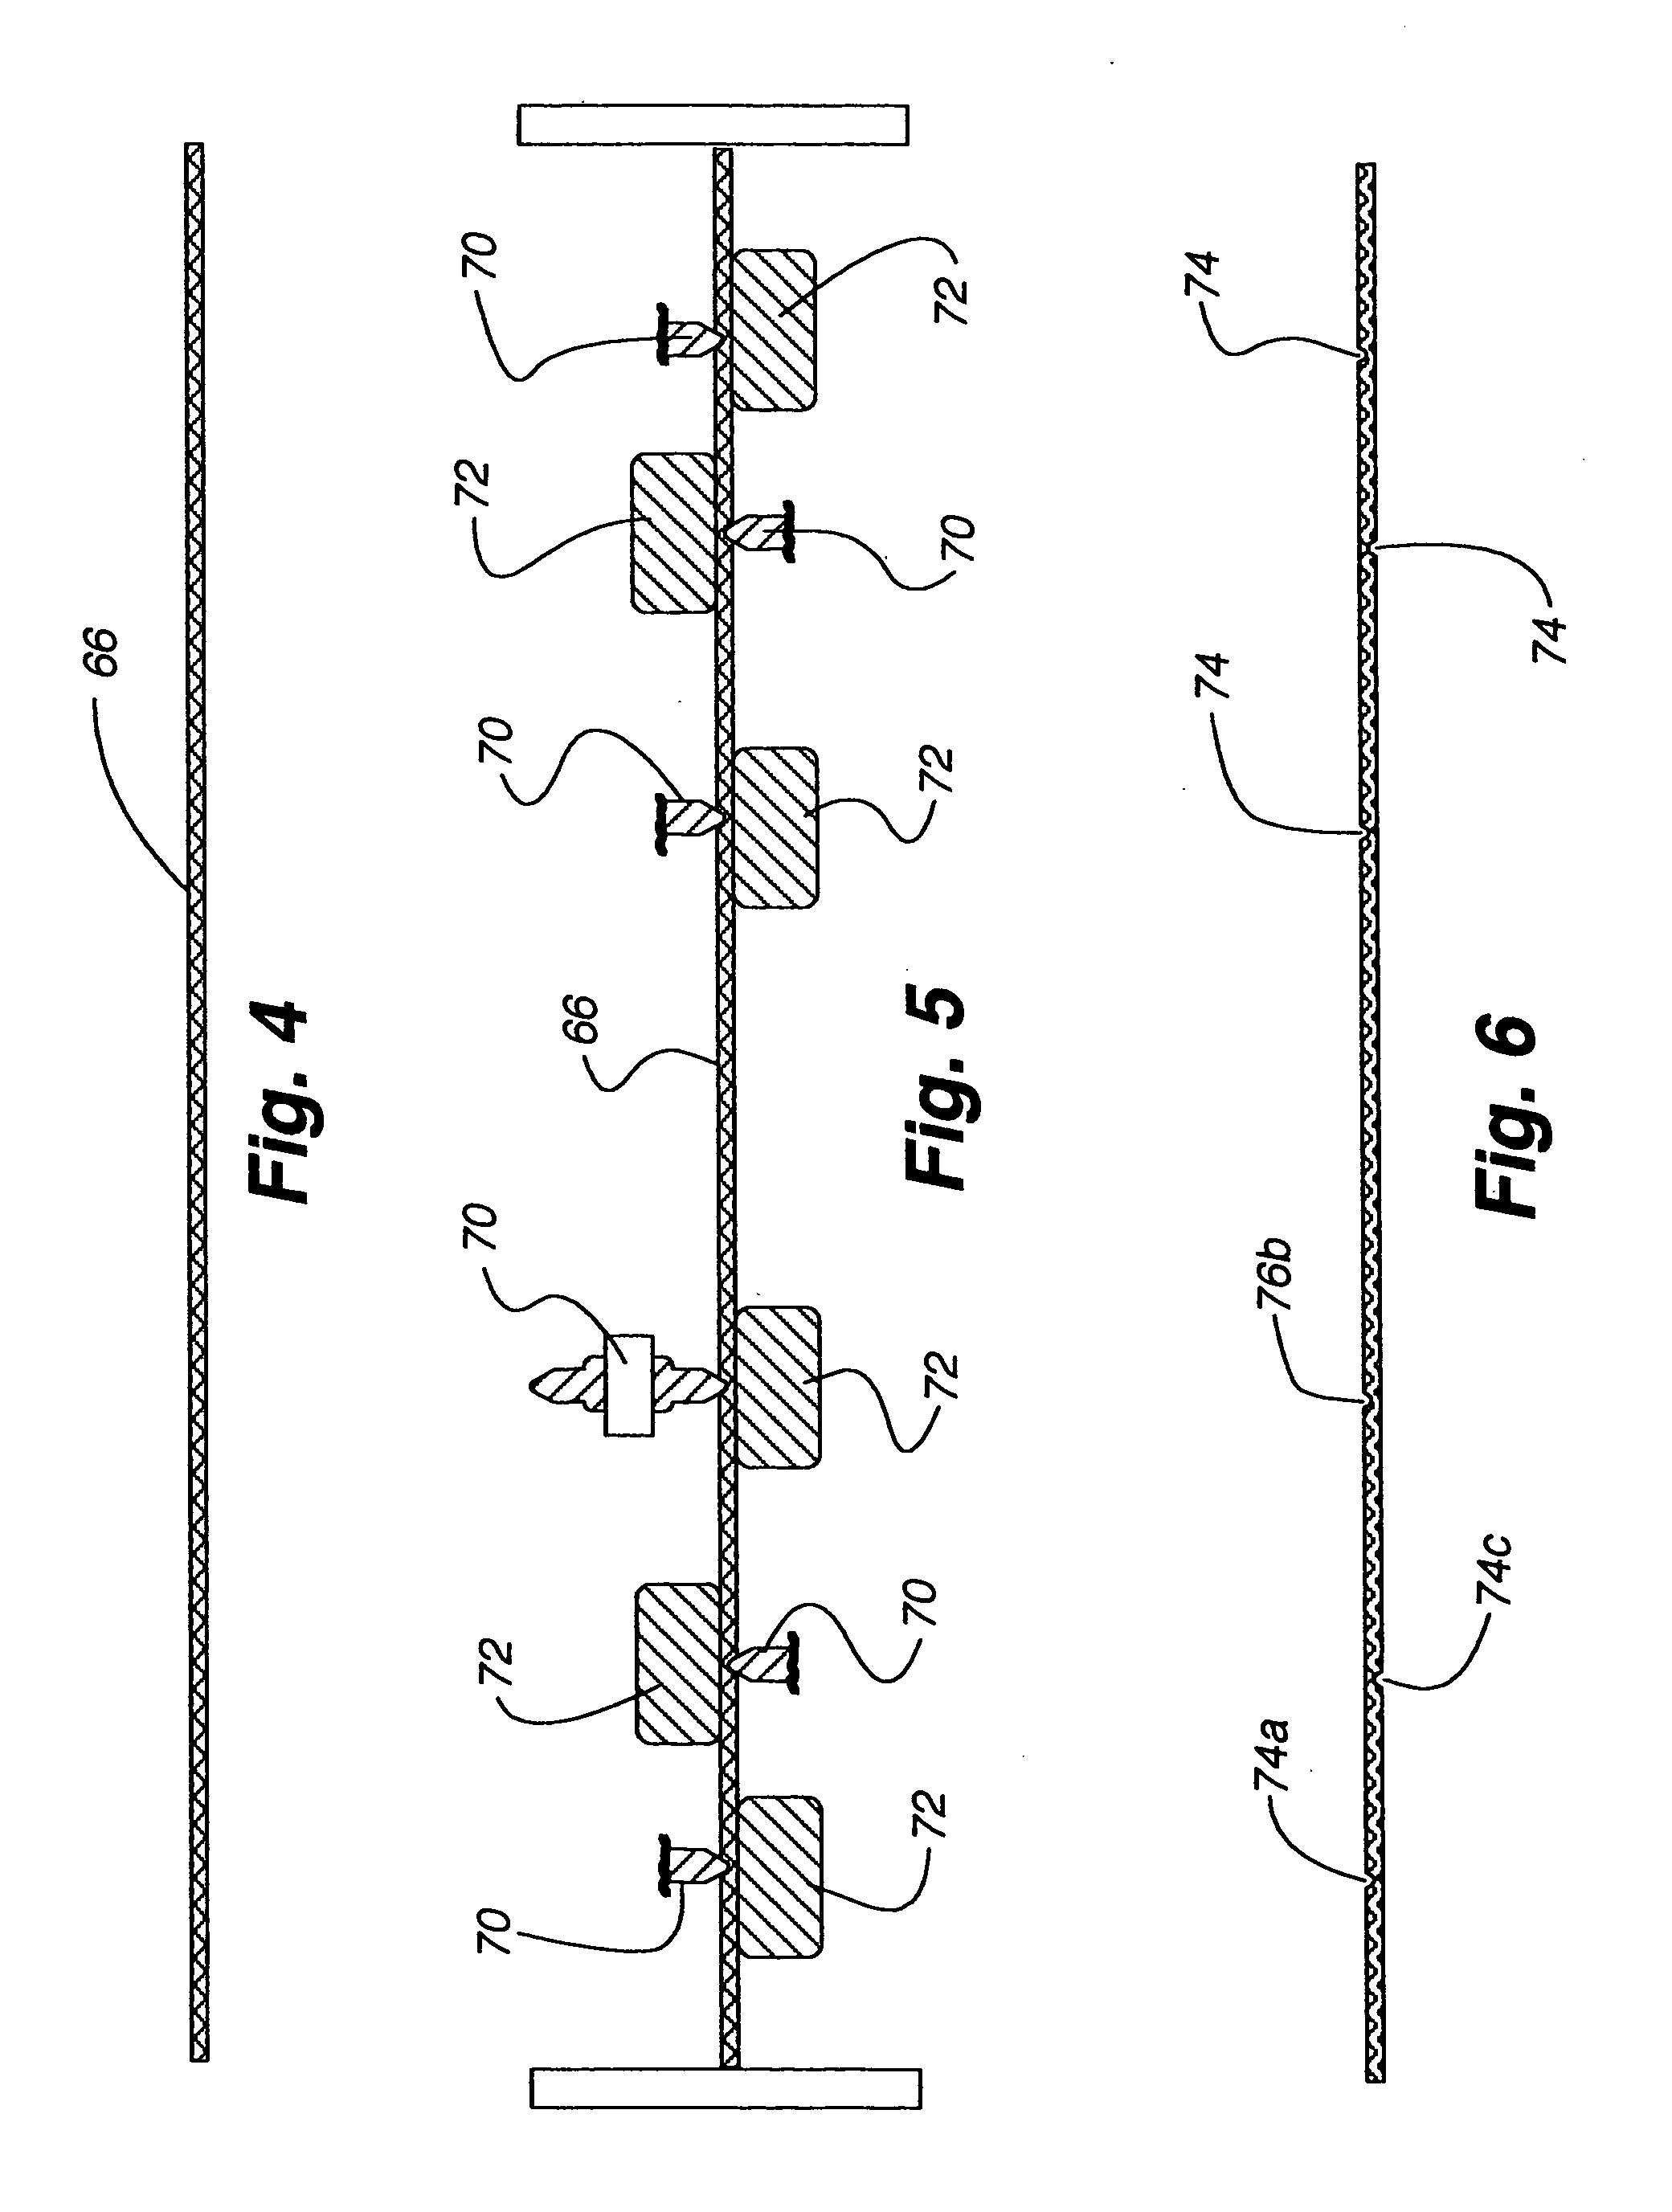 Structural panel with compressible dividers